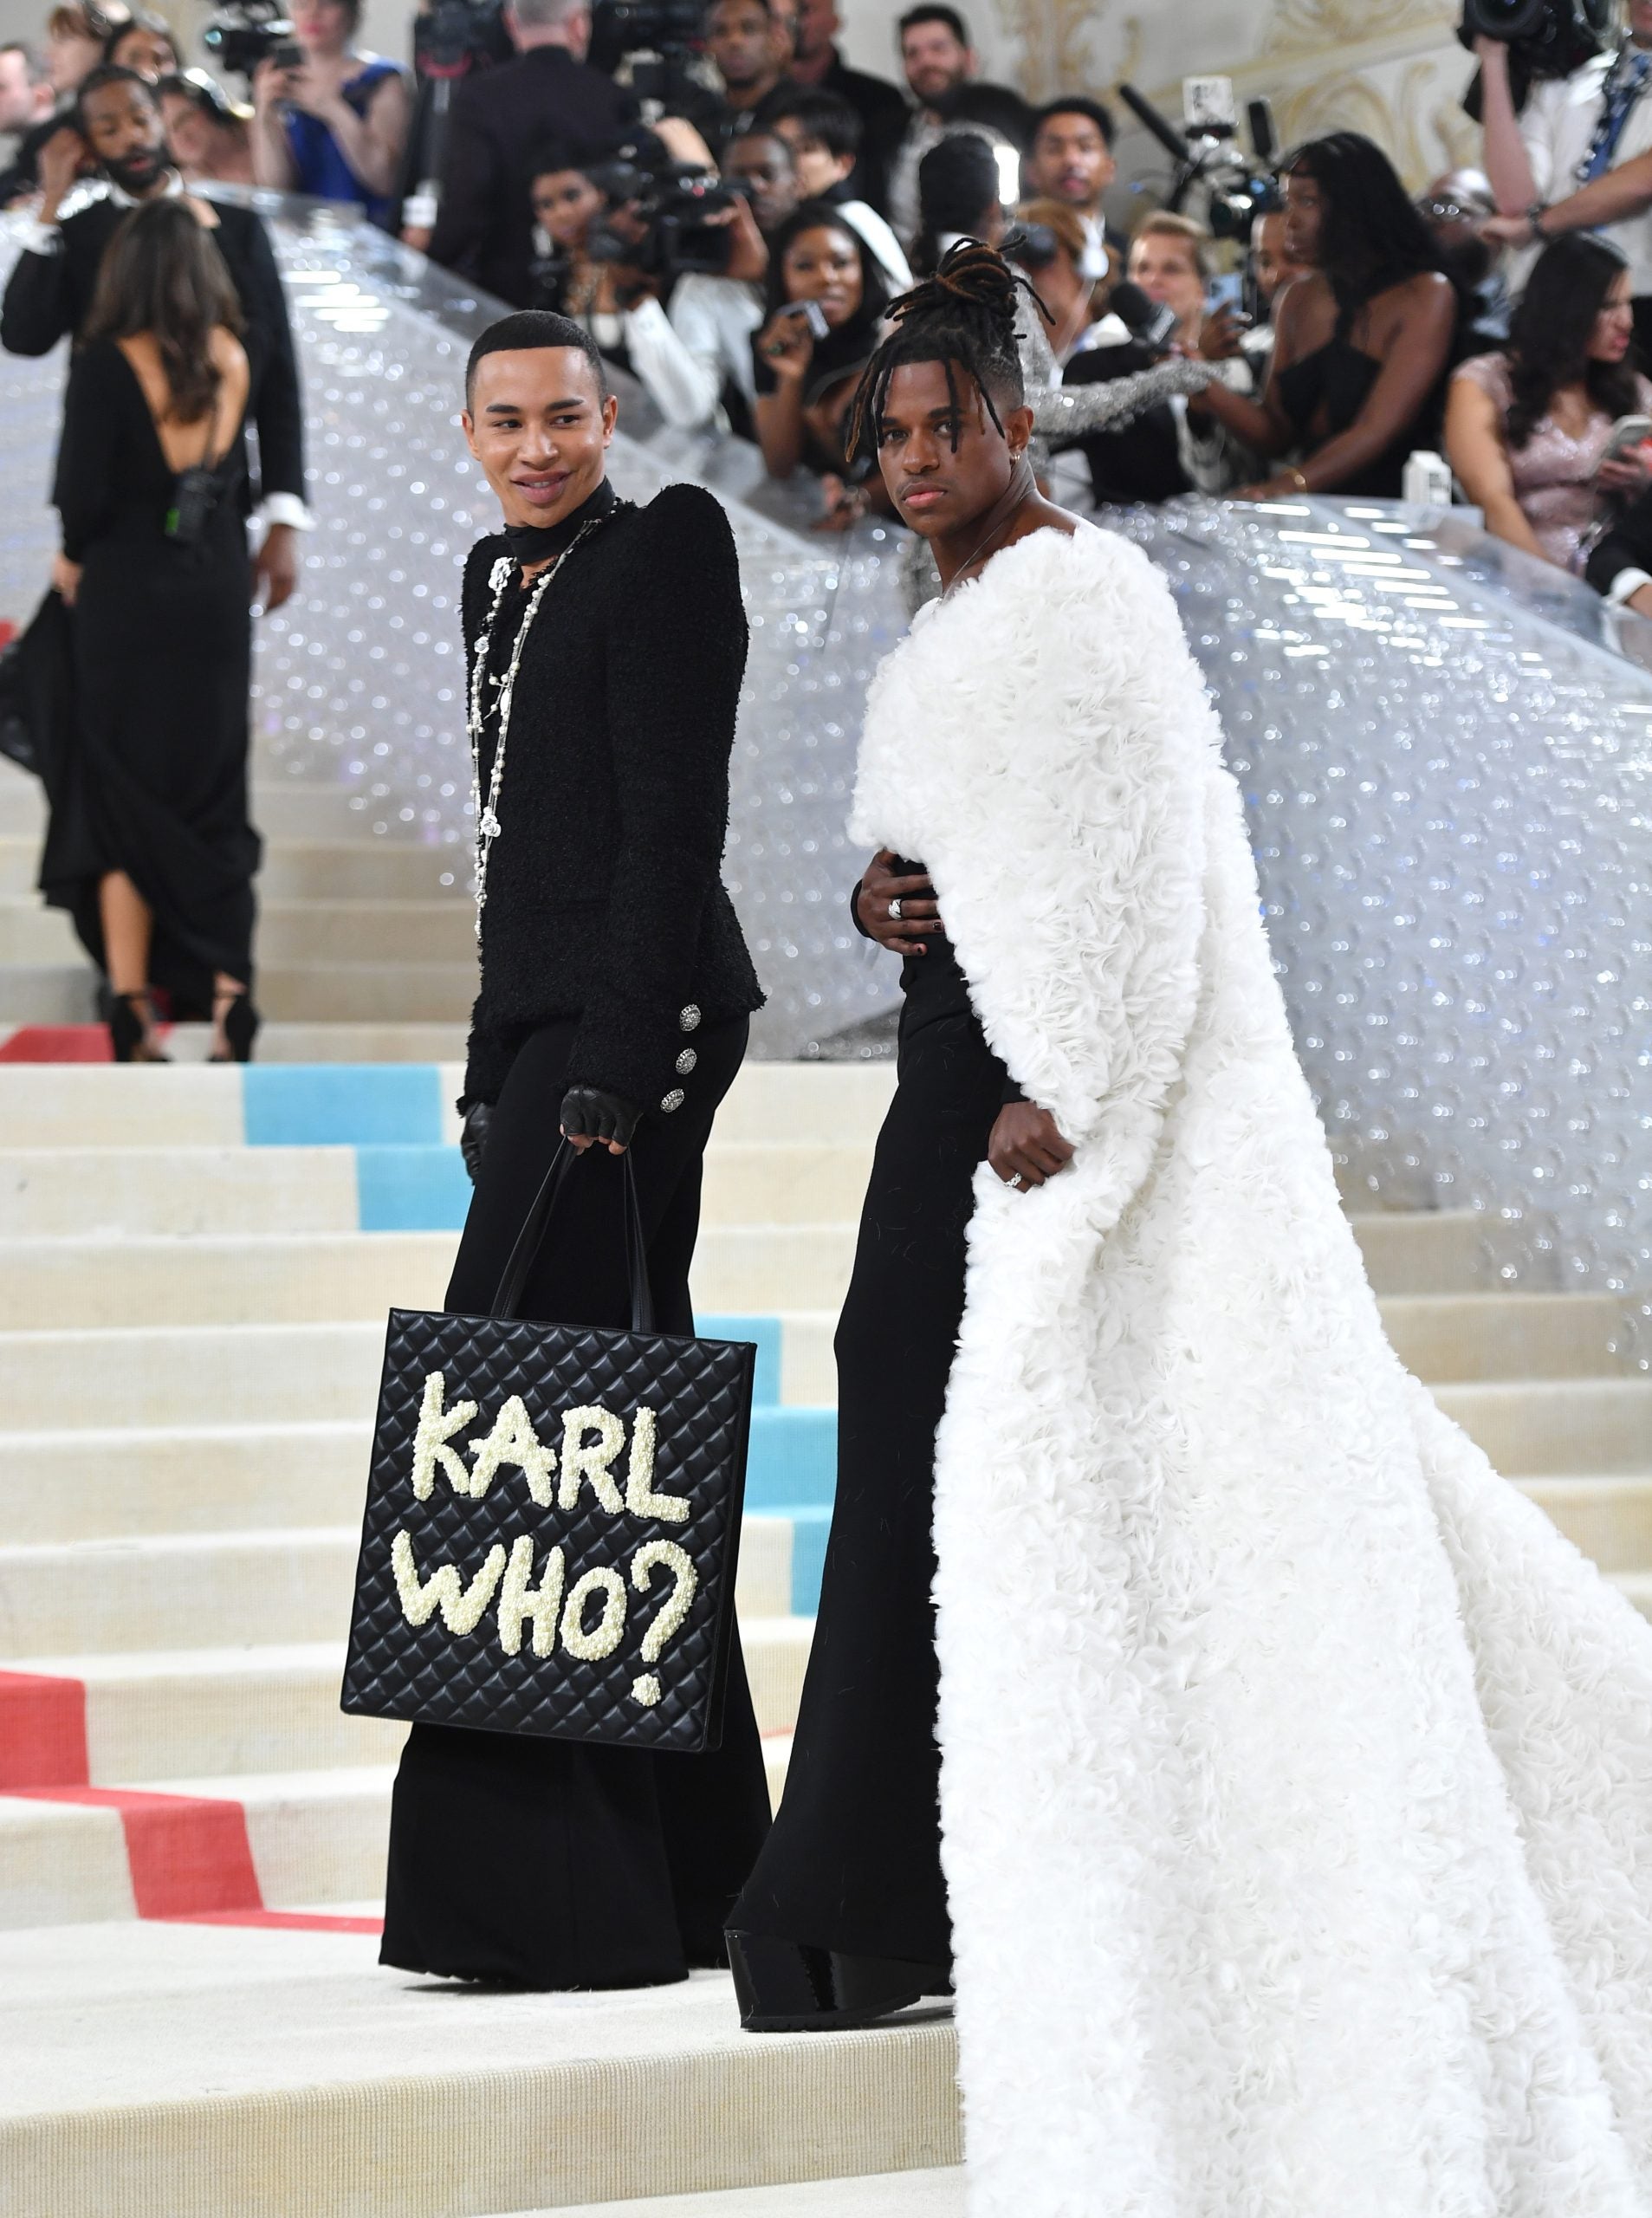 Met Gala 2023: All The Looks From The Stylish Red Carpet 